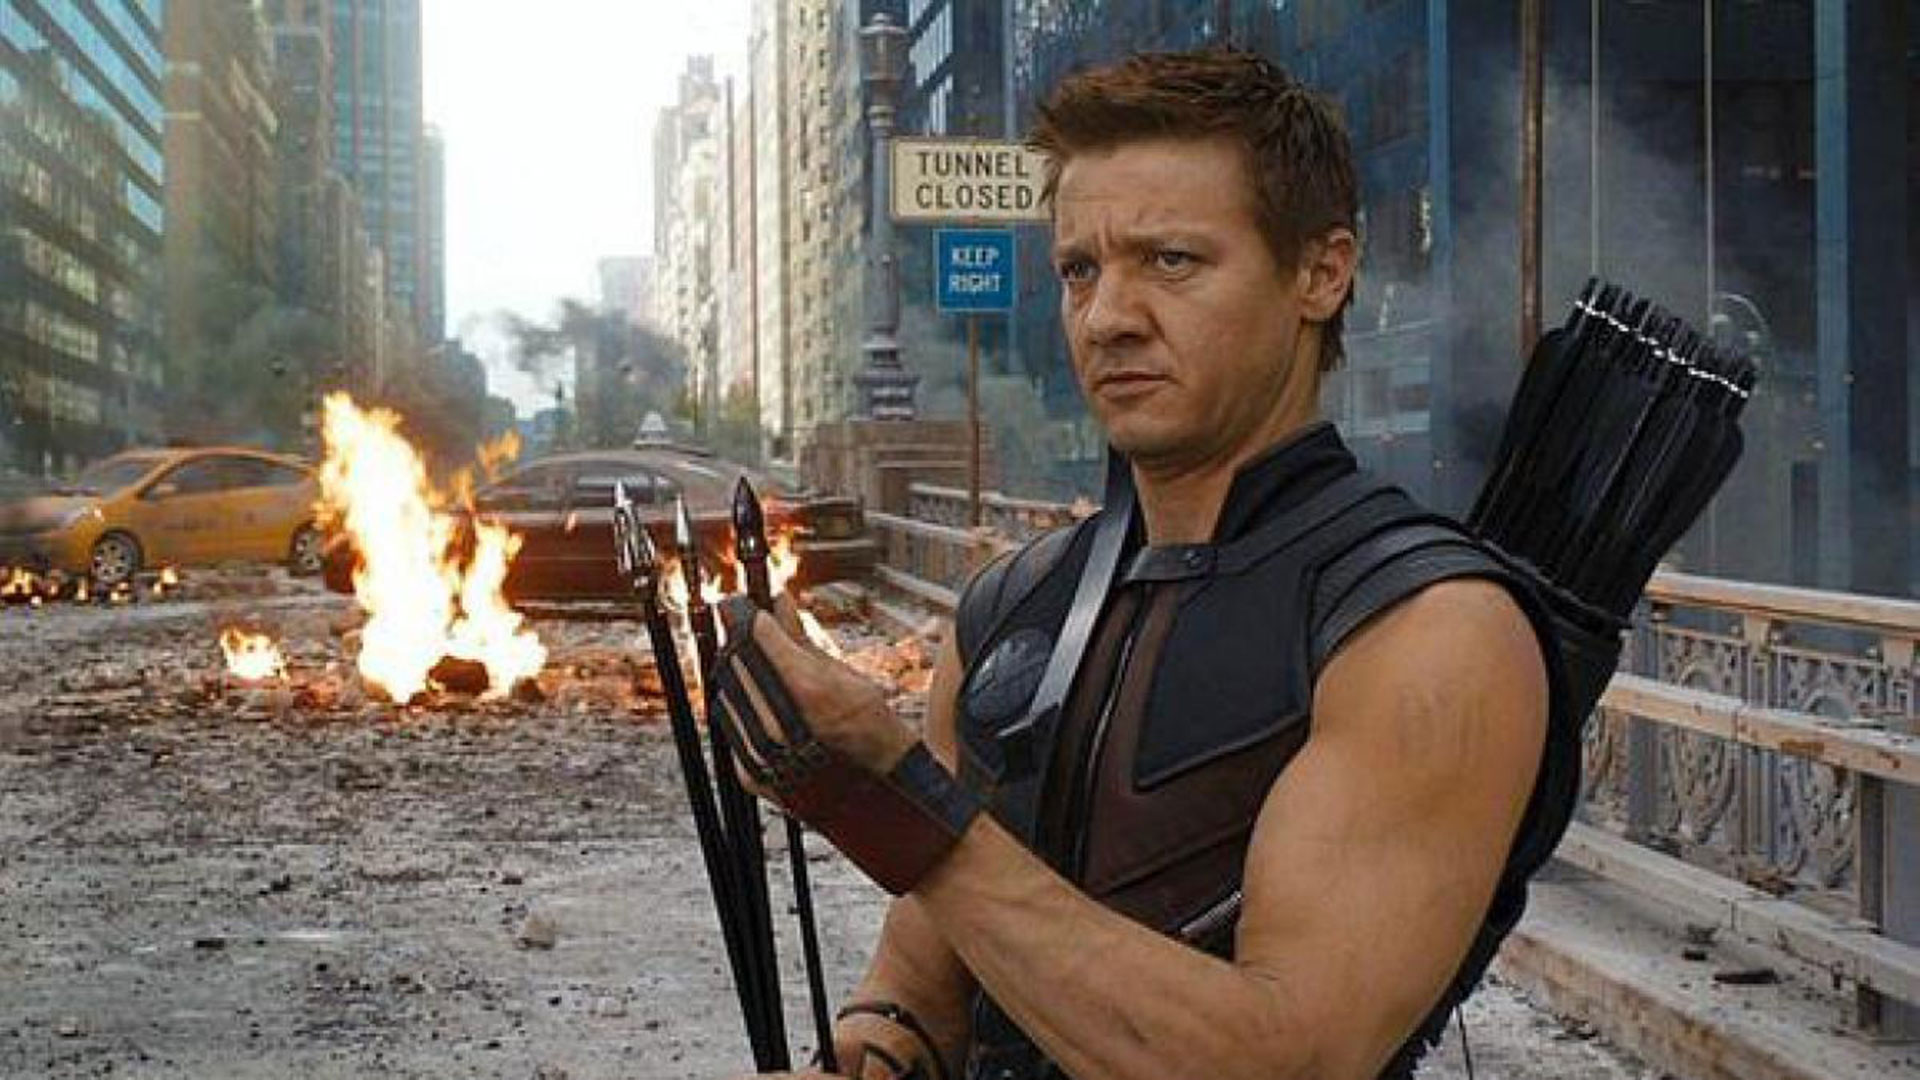 Jeremy Renner achieved international fame by putting himself in the shoes of the character Hawkeye in various Marvel productions